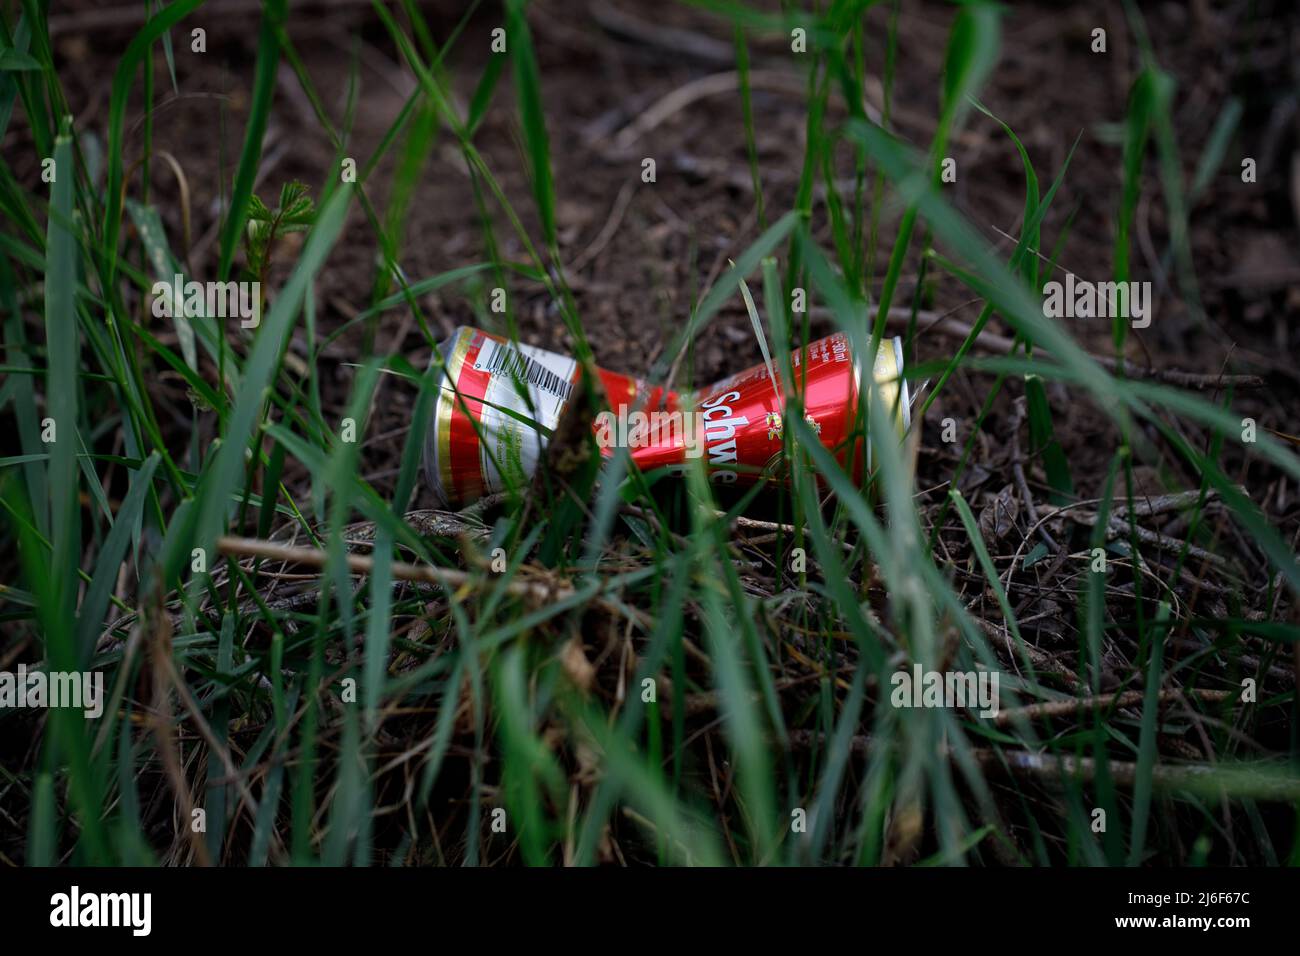 Littering In The Nature, Dropped Beer Can On The Ground Stock Photo